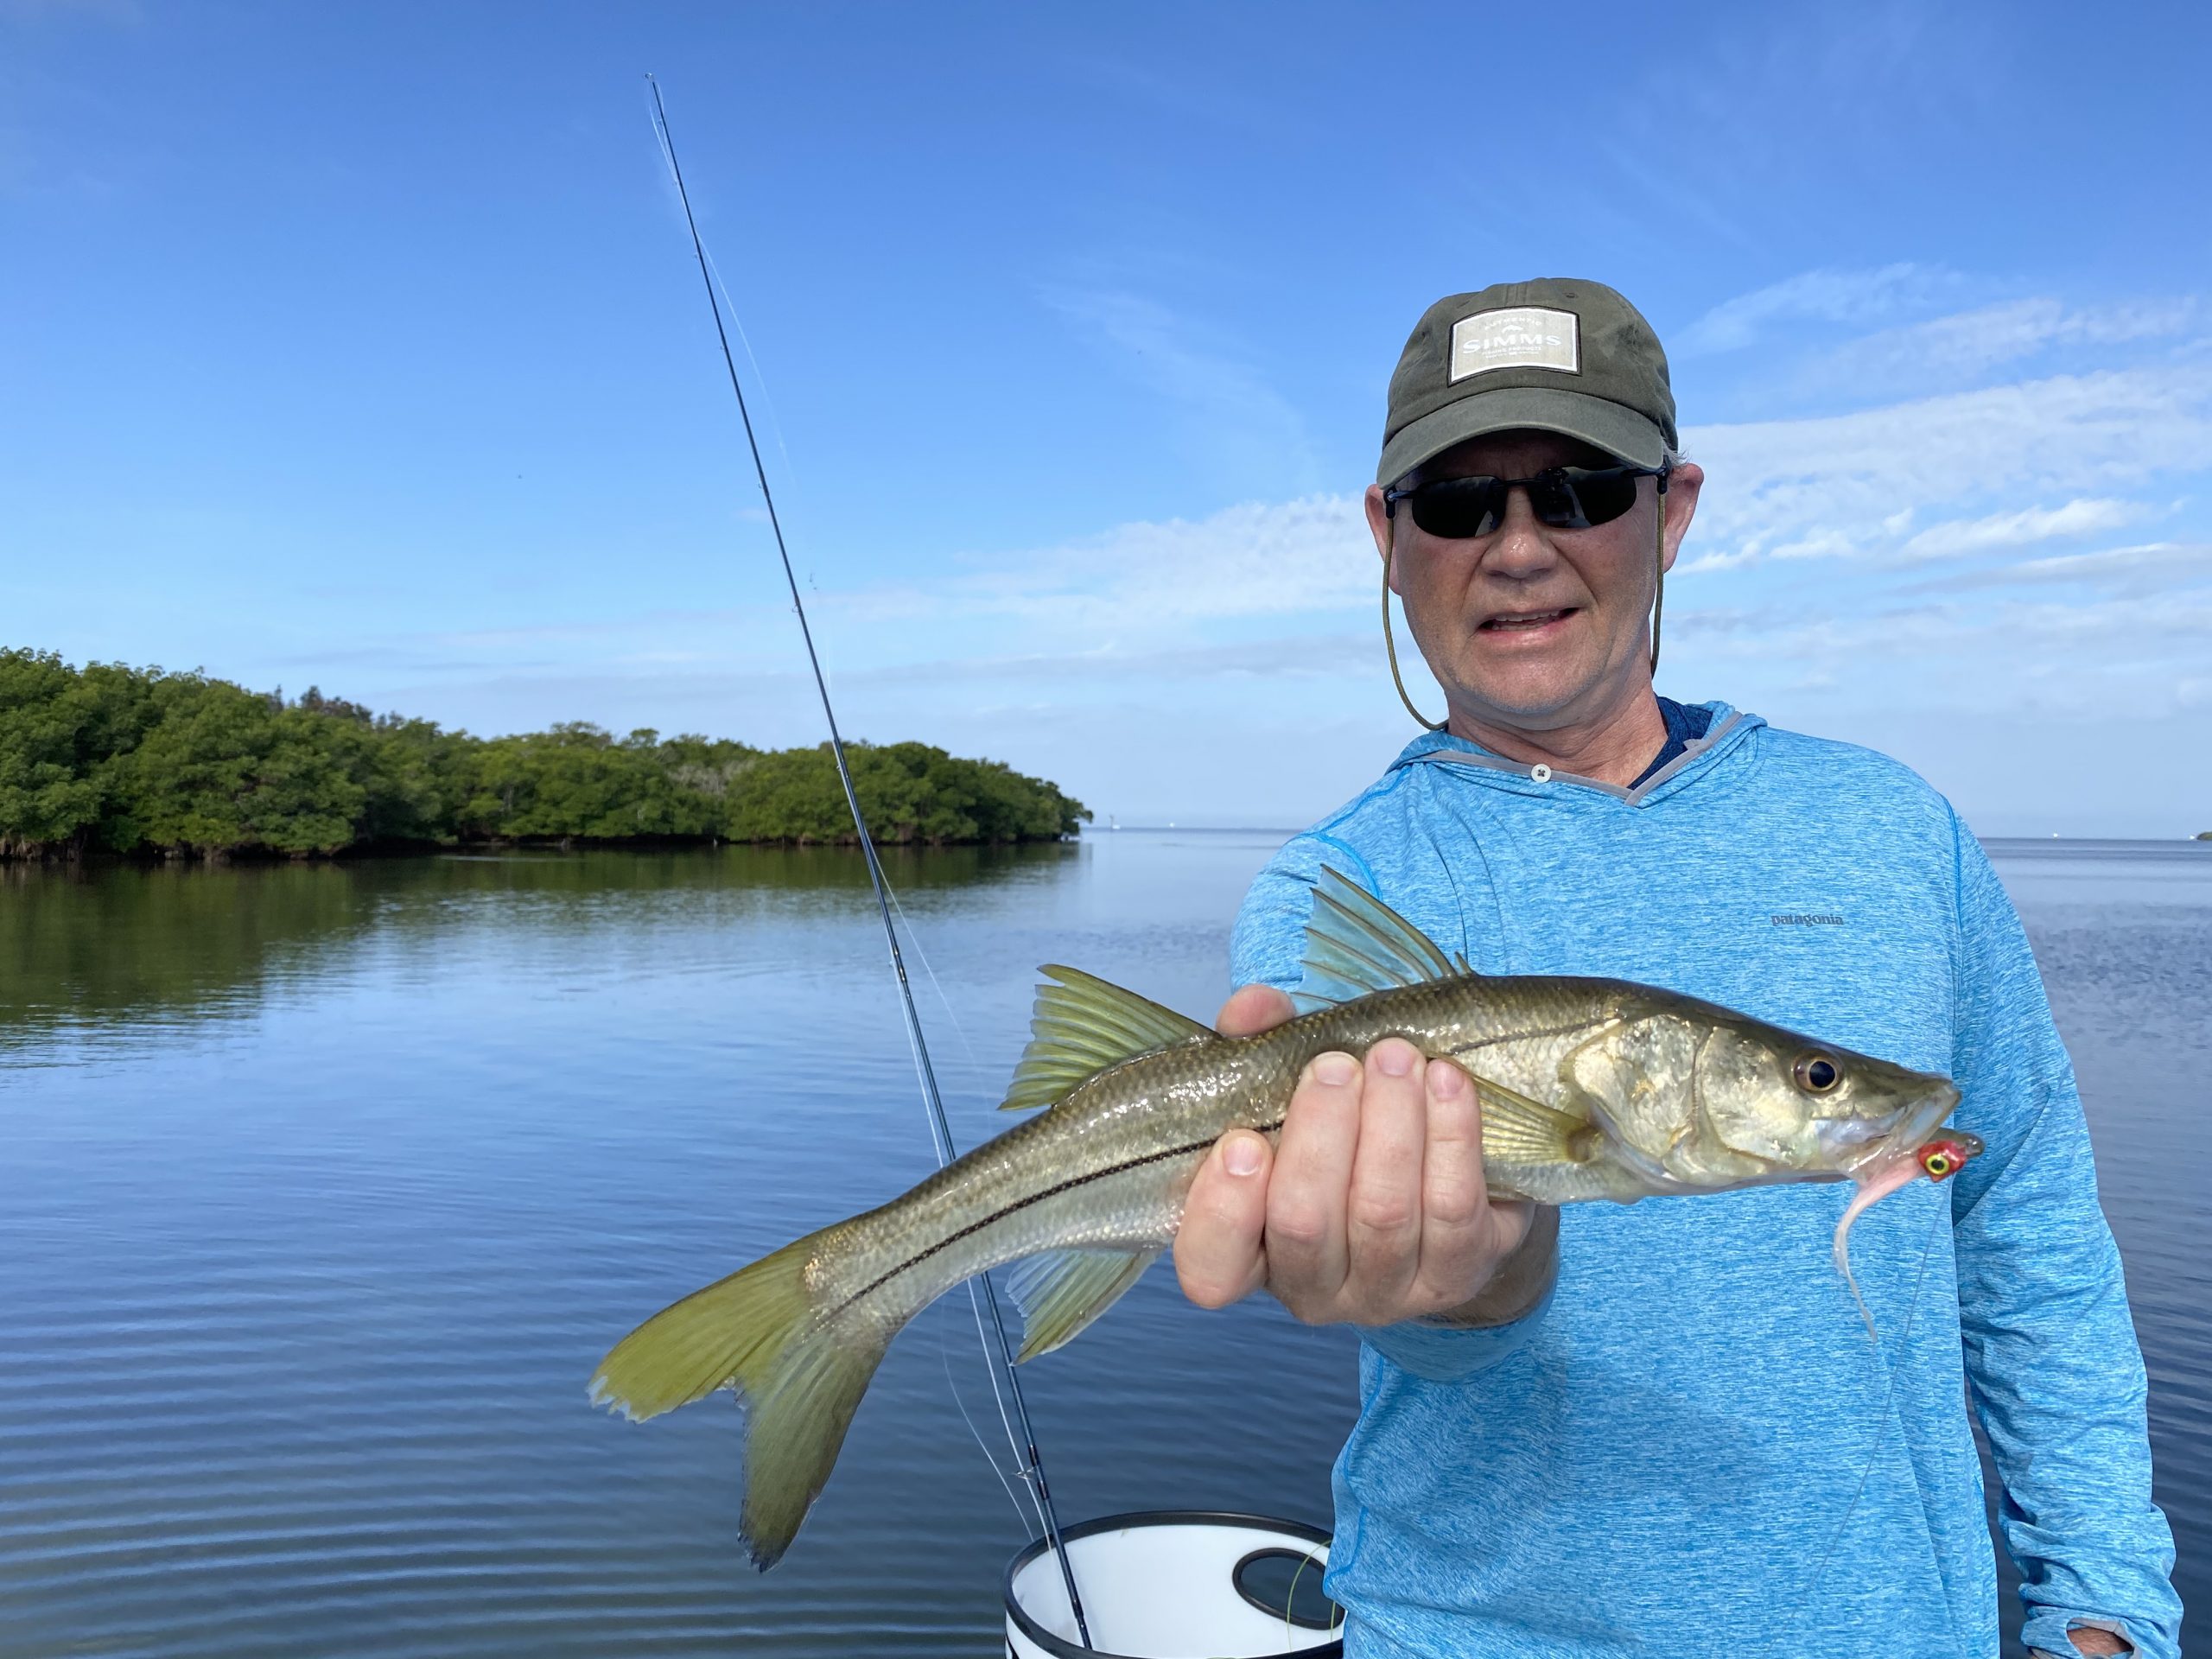 An angler holds a snook caught while fly fishing in lower tampa bay